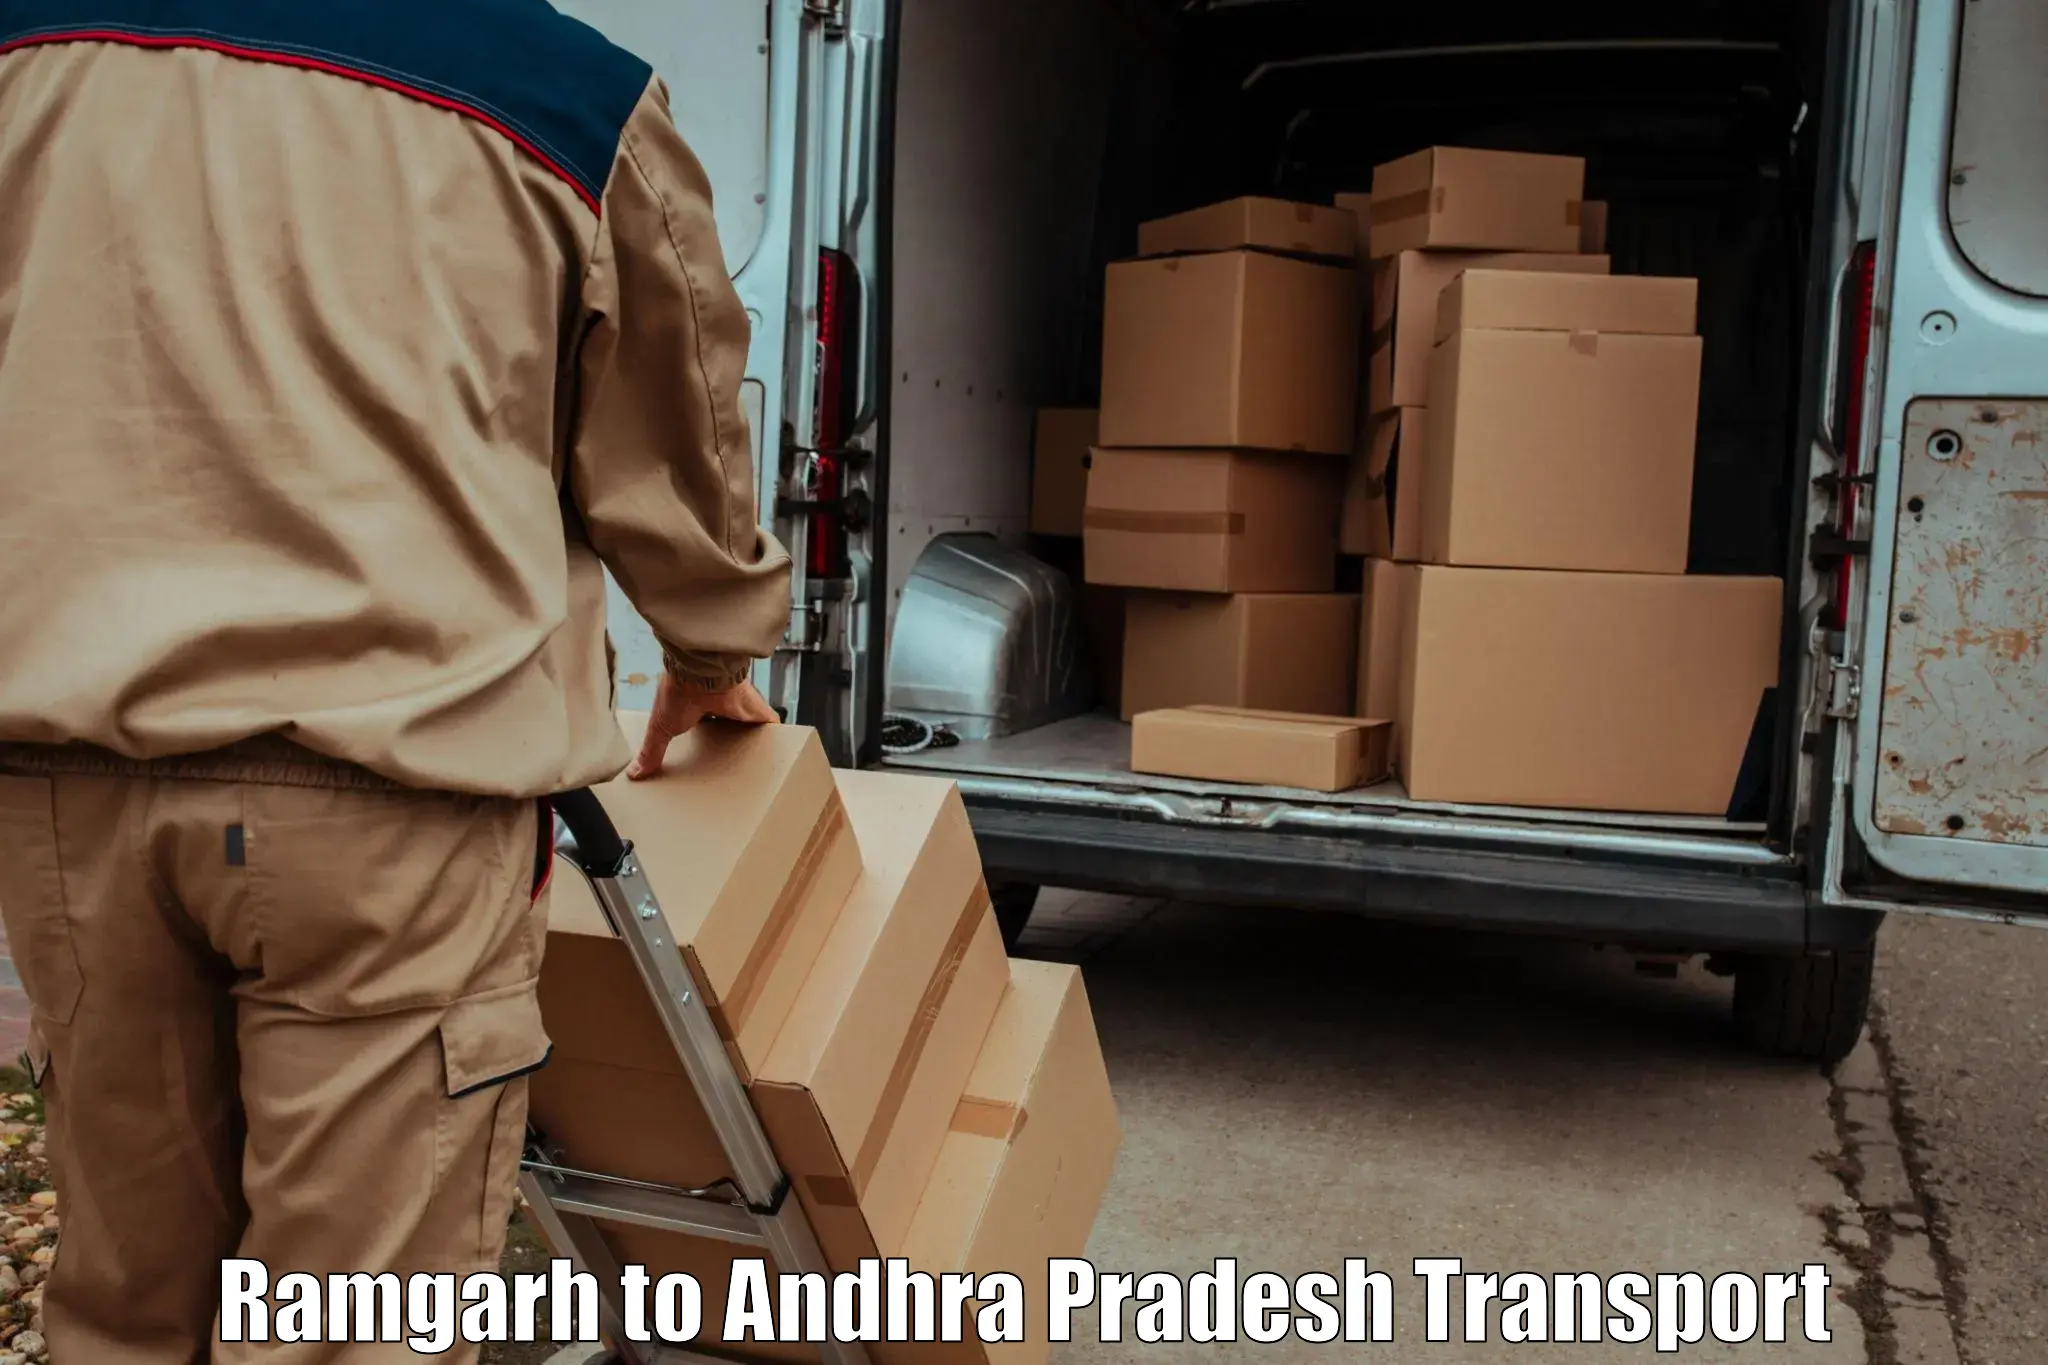 Truck transport companies in India Ramgarh to Challapalli